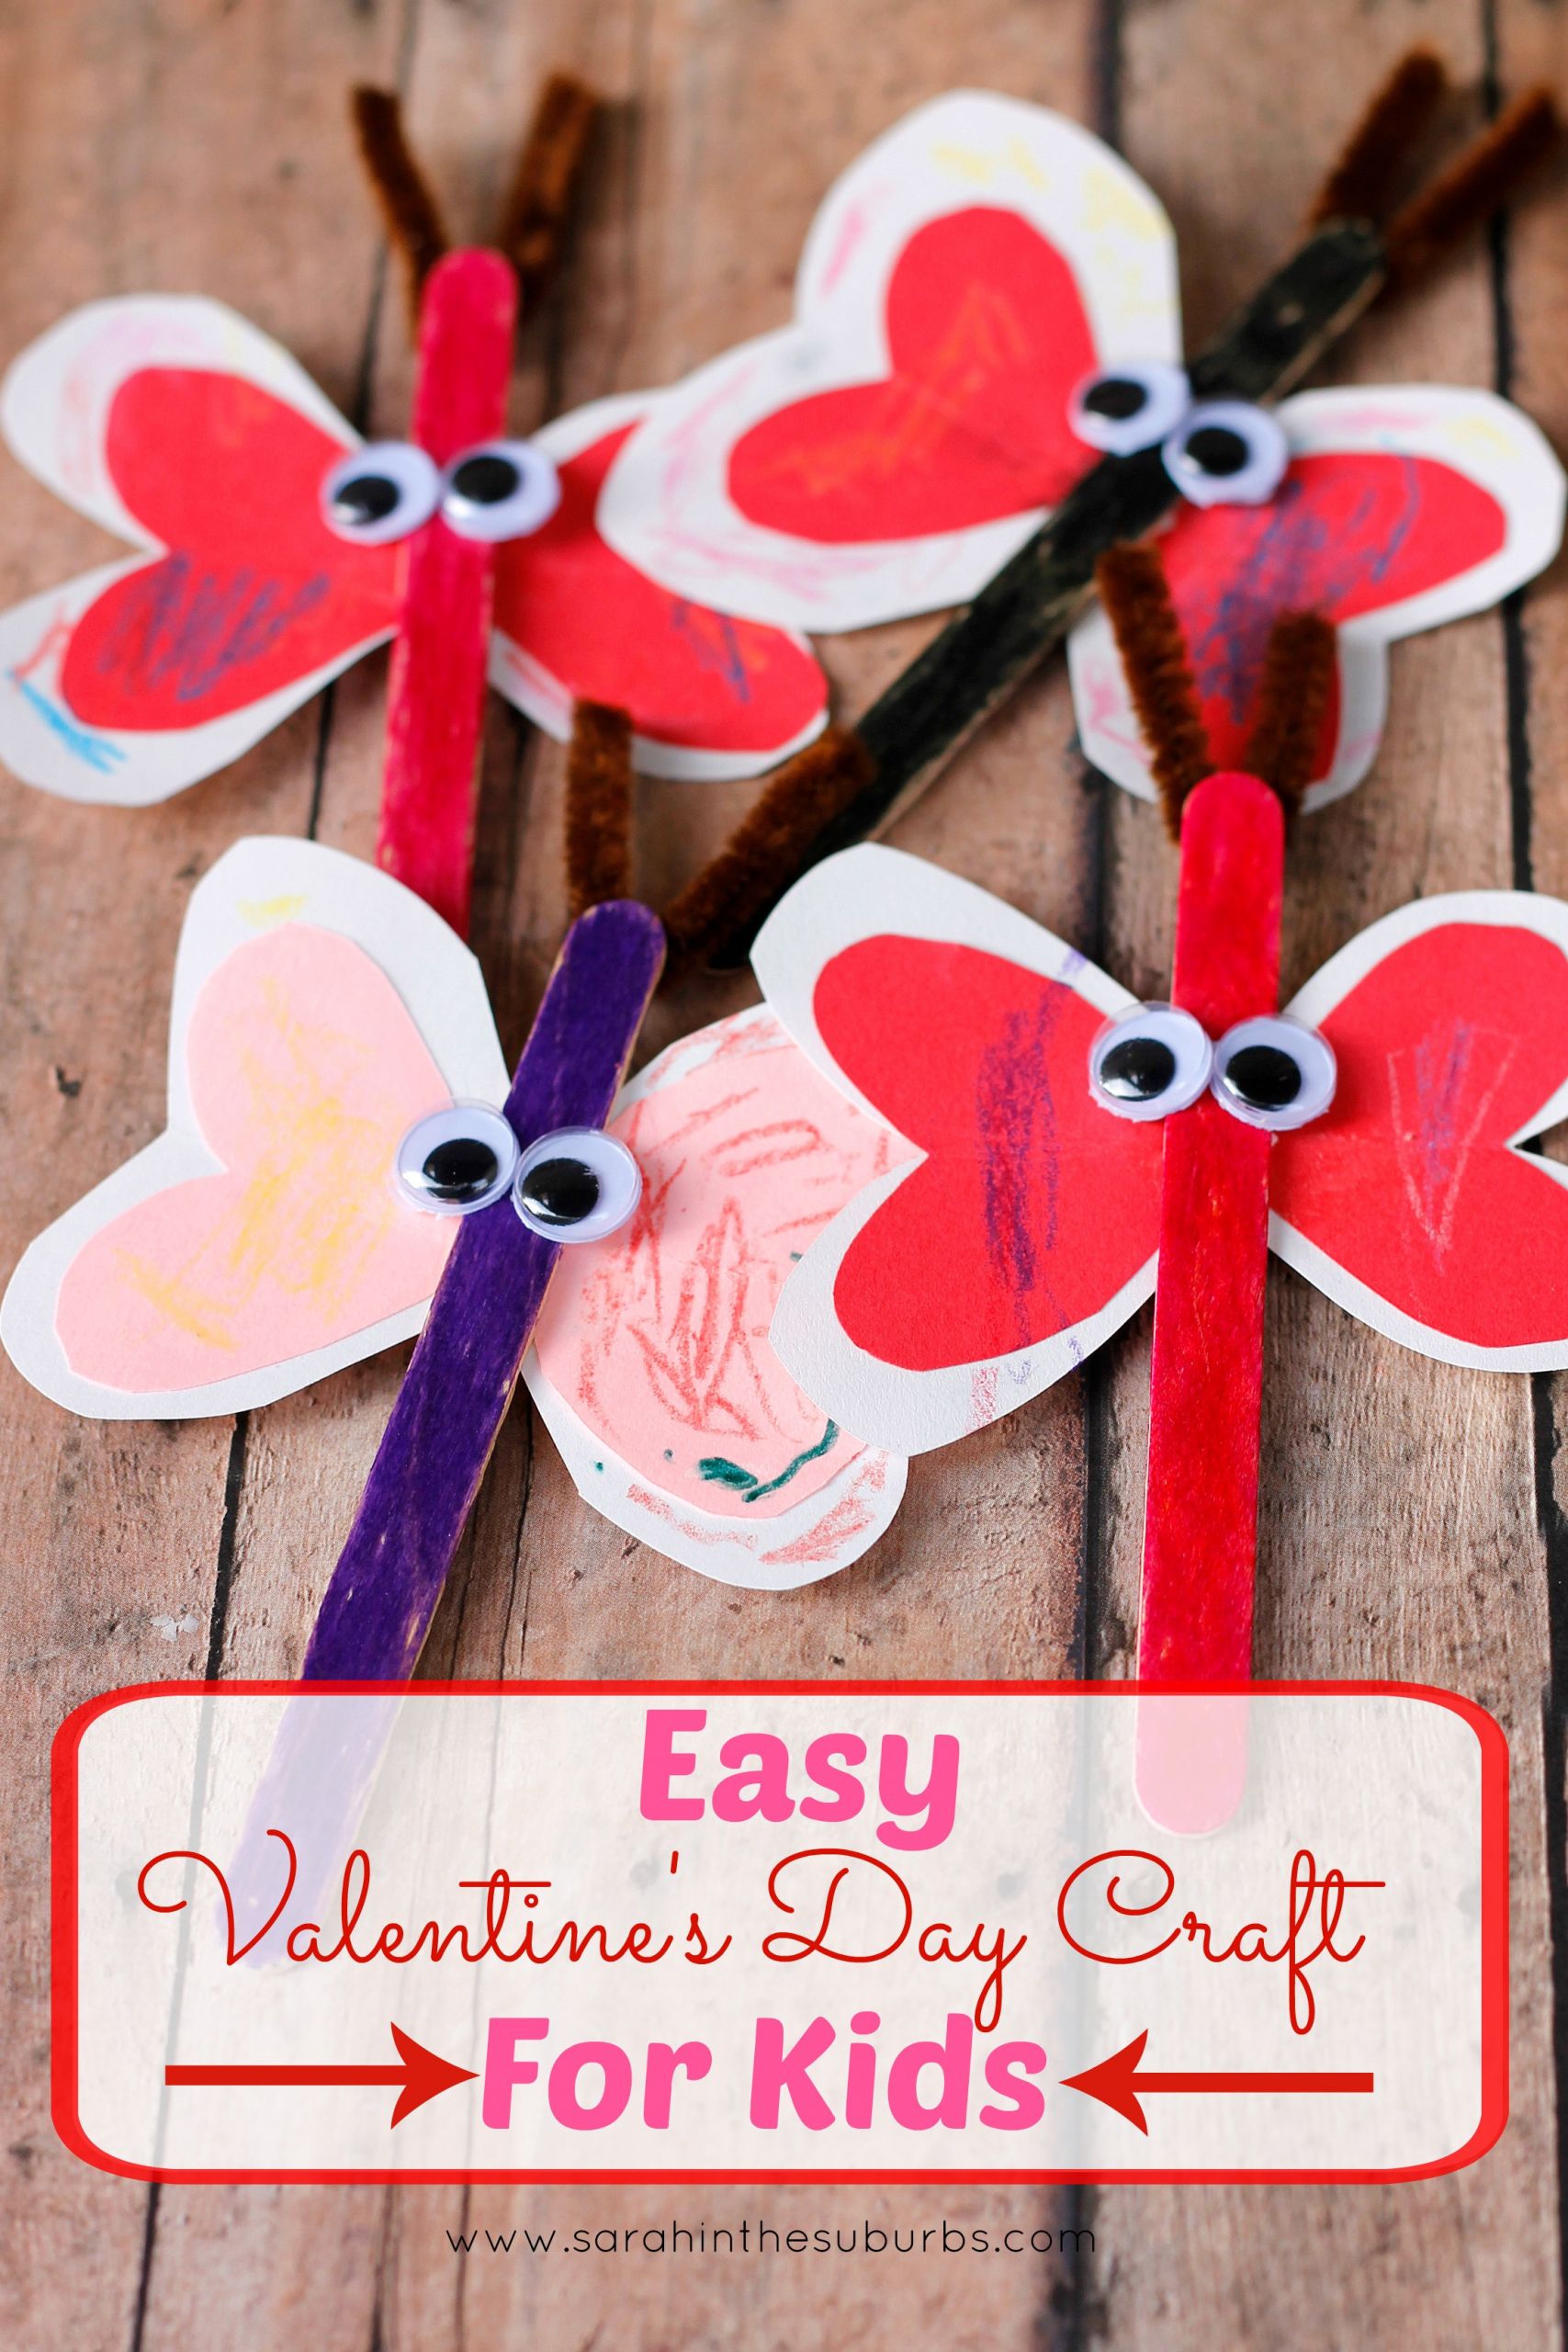 Valentines Kids Craft Ideas
 Easy Valentine s Day Craft for Kids Sarah in the Suburbs